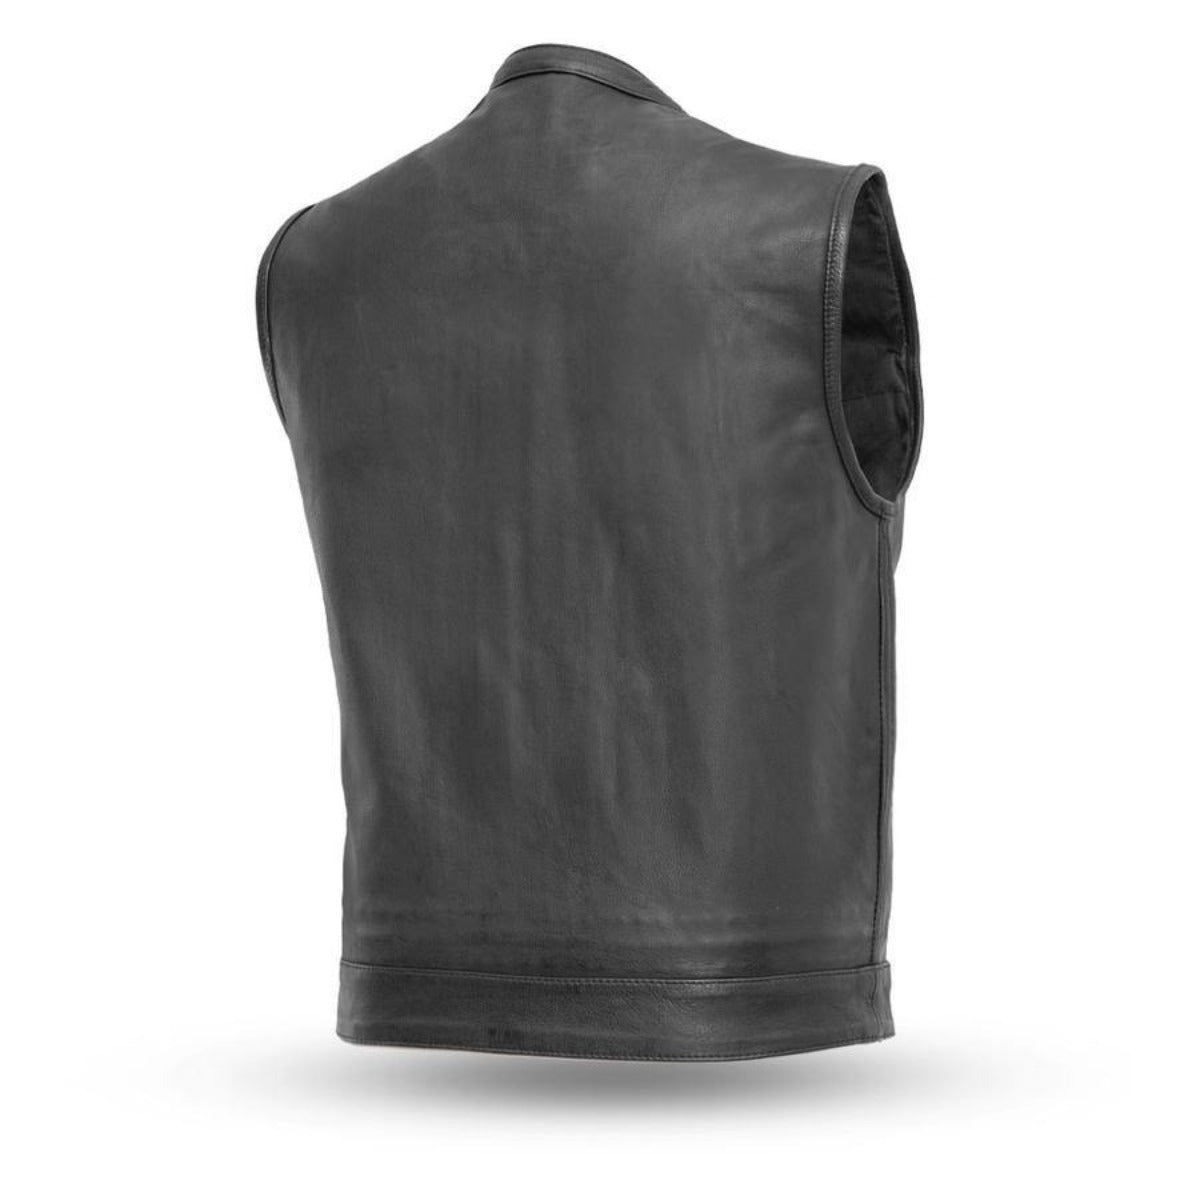 First Manufacturing Sharp Shooter Motorcycle Leather Vest, Black - American Legend Rider